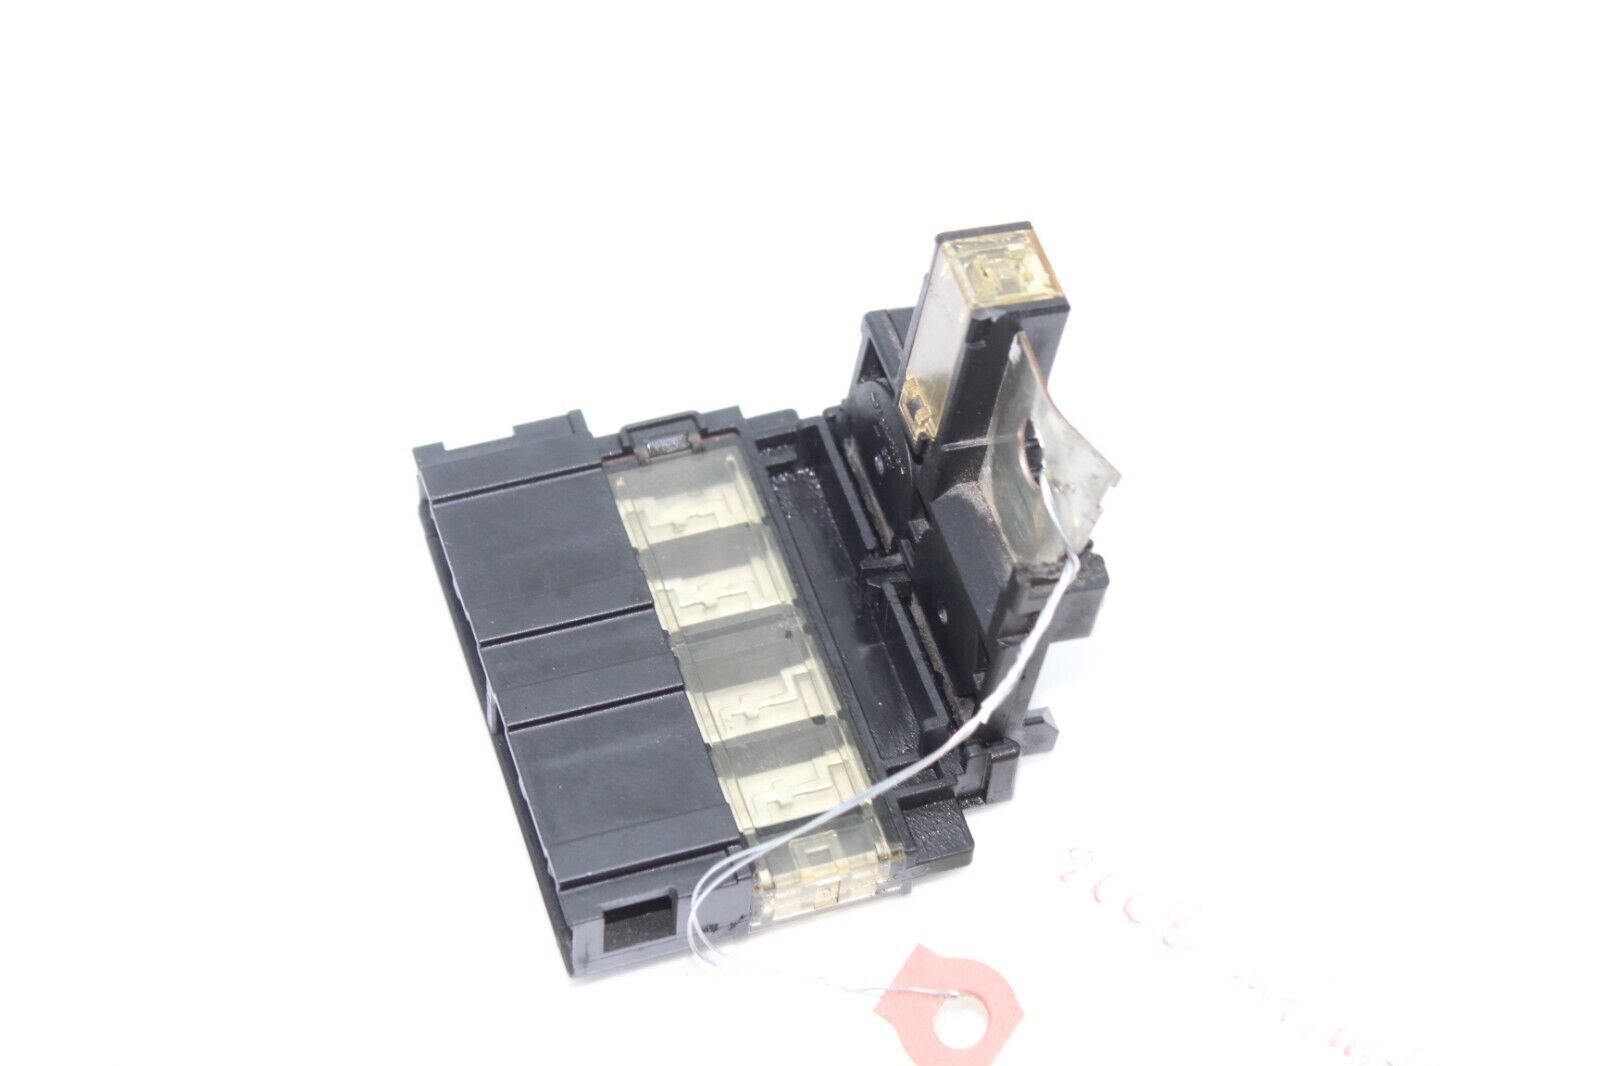 Primary image for 07-08 INFINITI G35 POSITIVE BATTERY FUSE TERMINAL FUSIBLE LINK Q8549